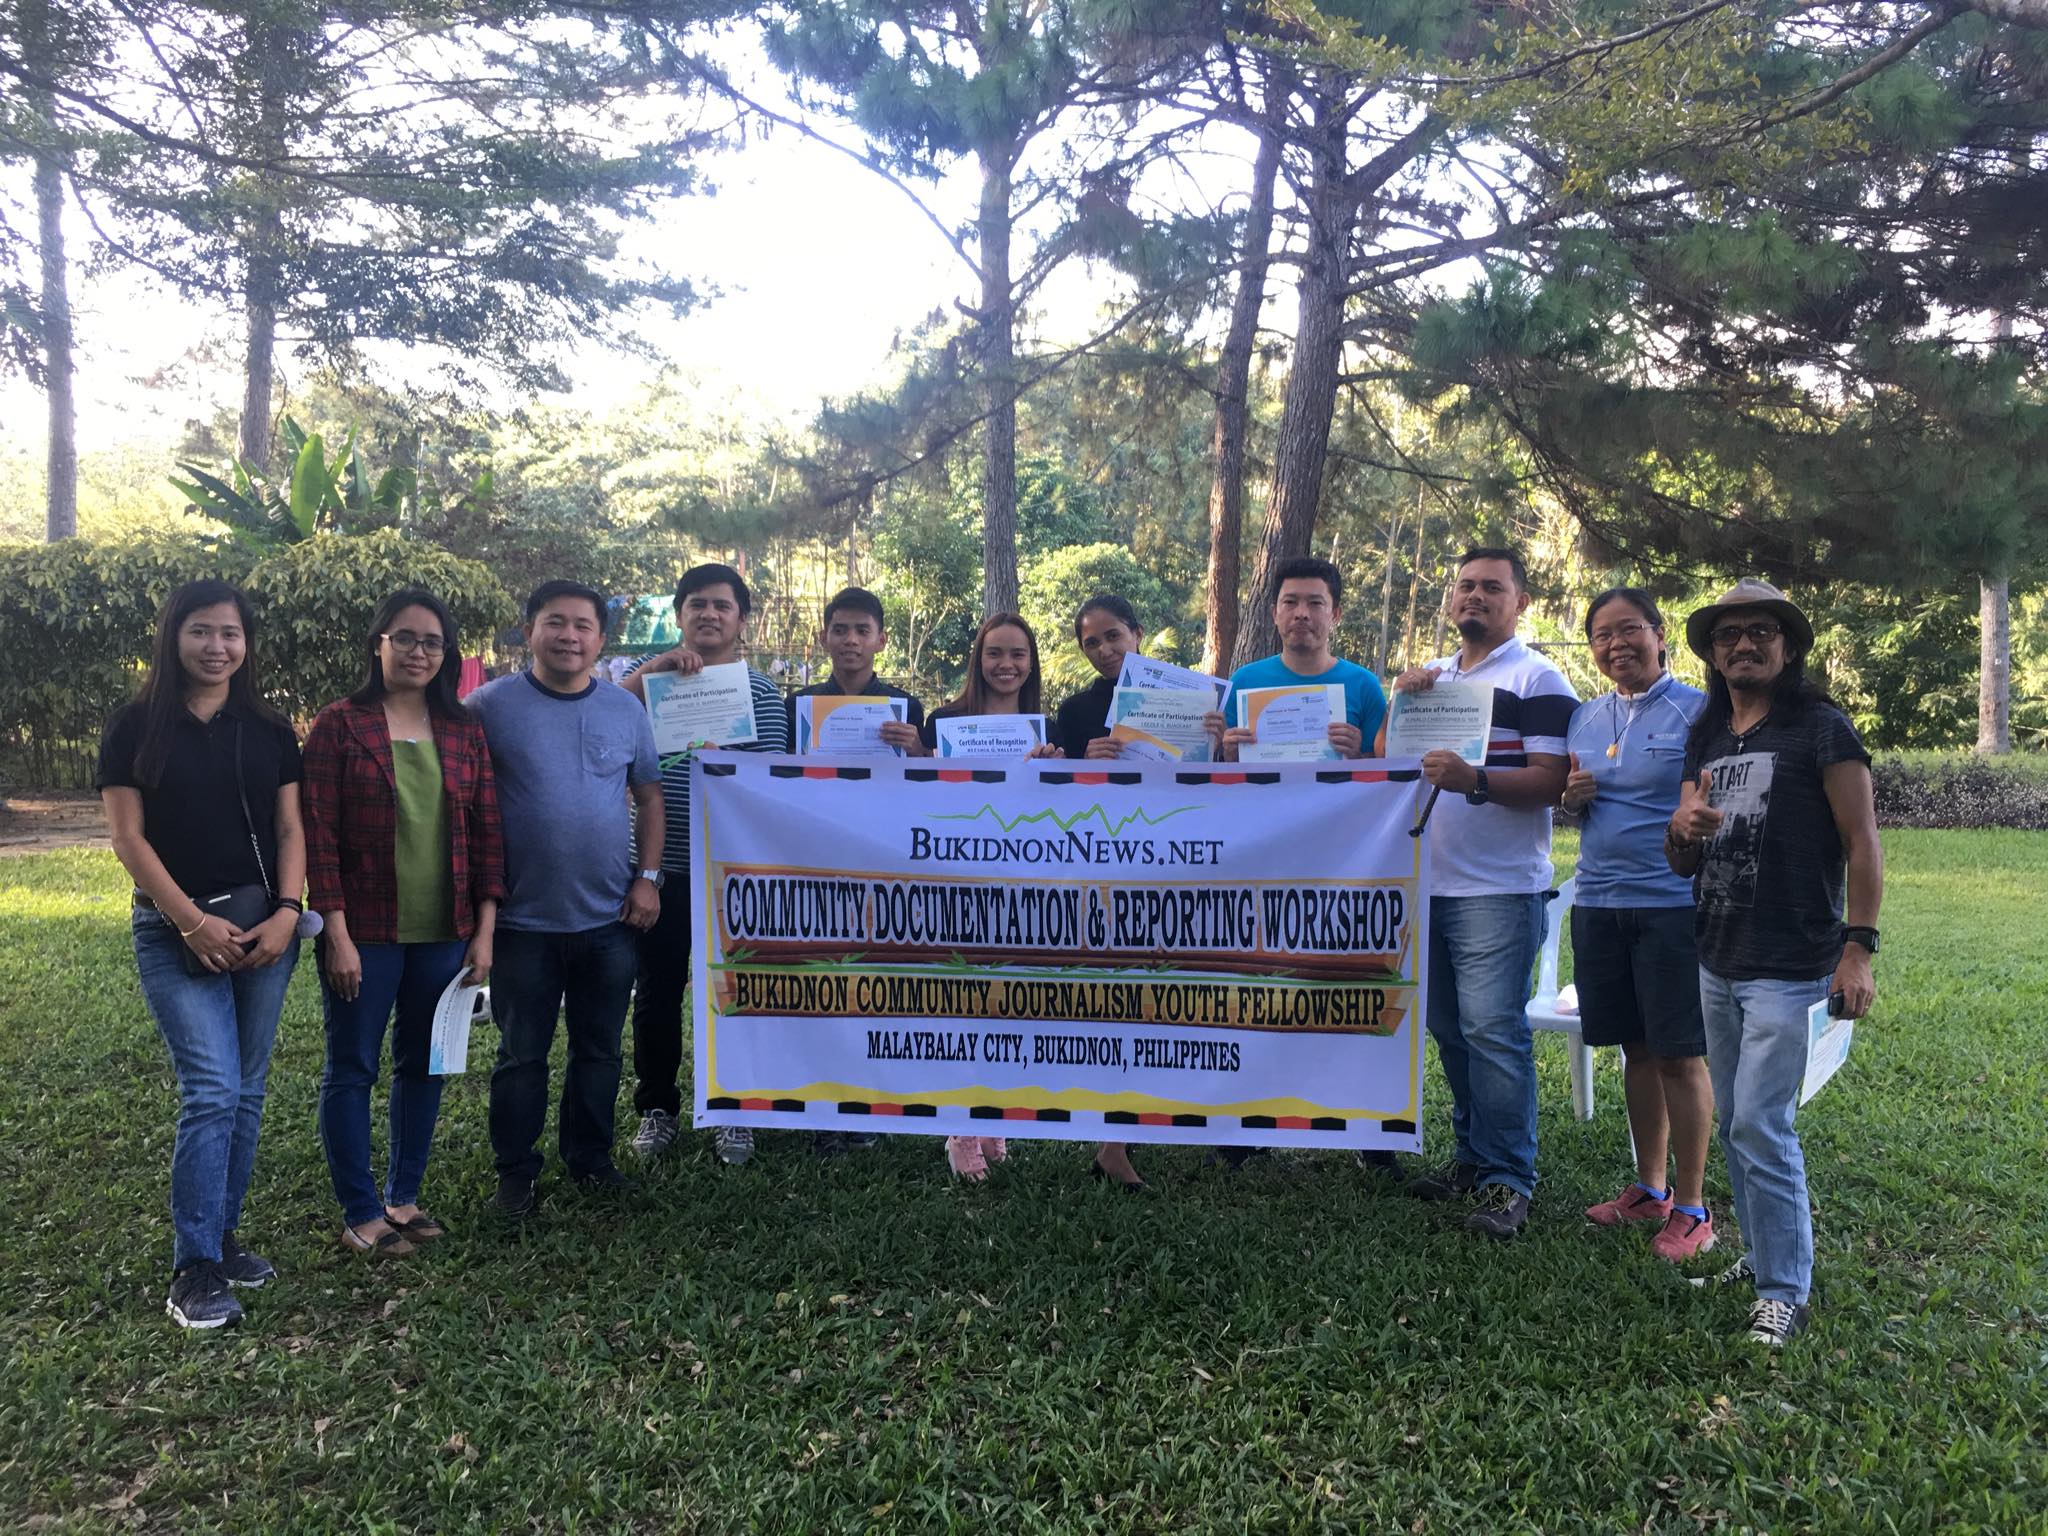 Fellows of the BukidnonNews.Net Community Journalism Youth Fellowship 2019 pose with staff, volunteers and partners during the closing rites in a private school compound in Malaybalay City in January 2020/BukidnonNews.net photo